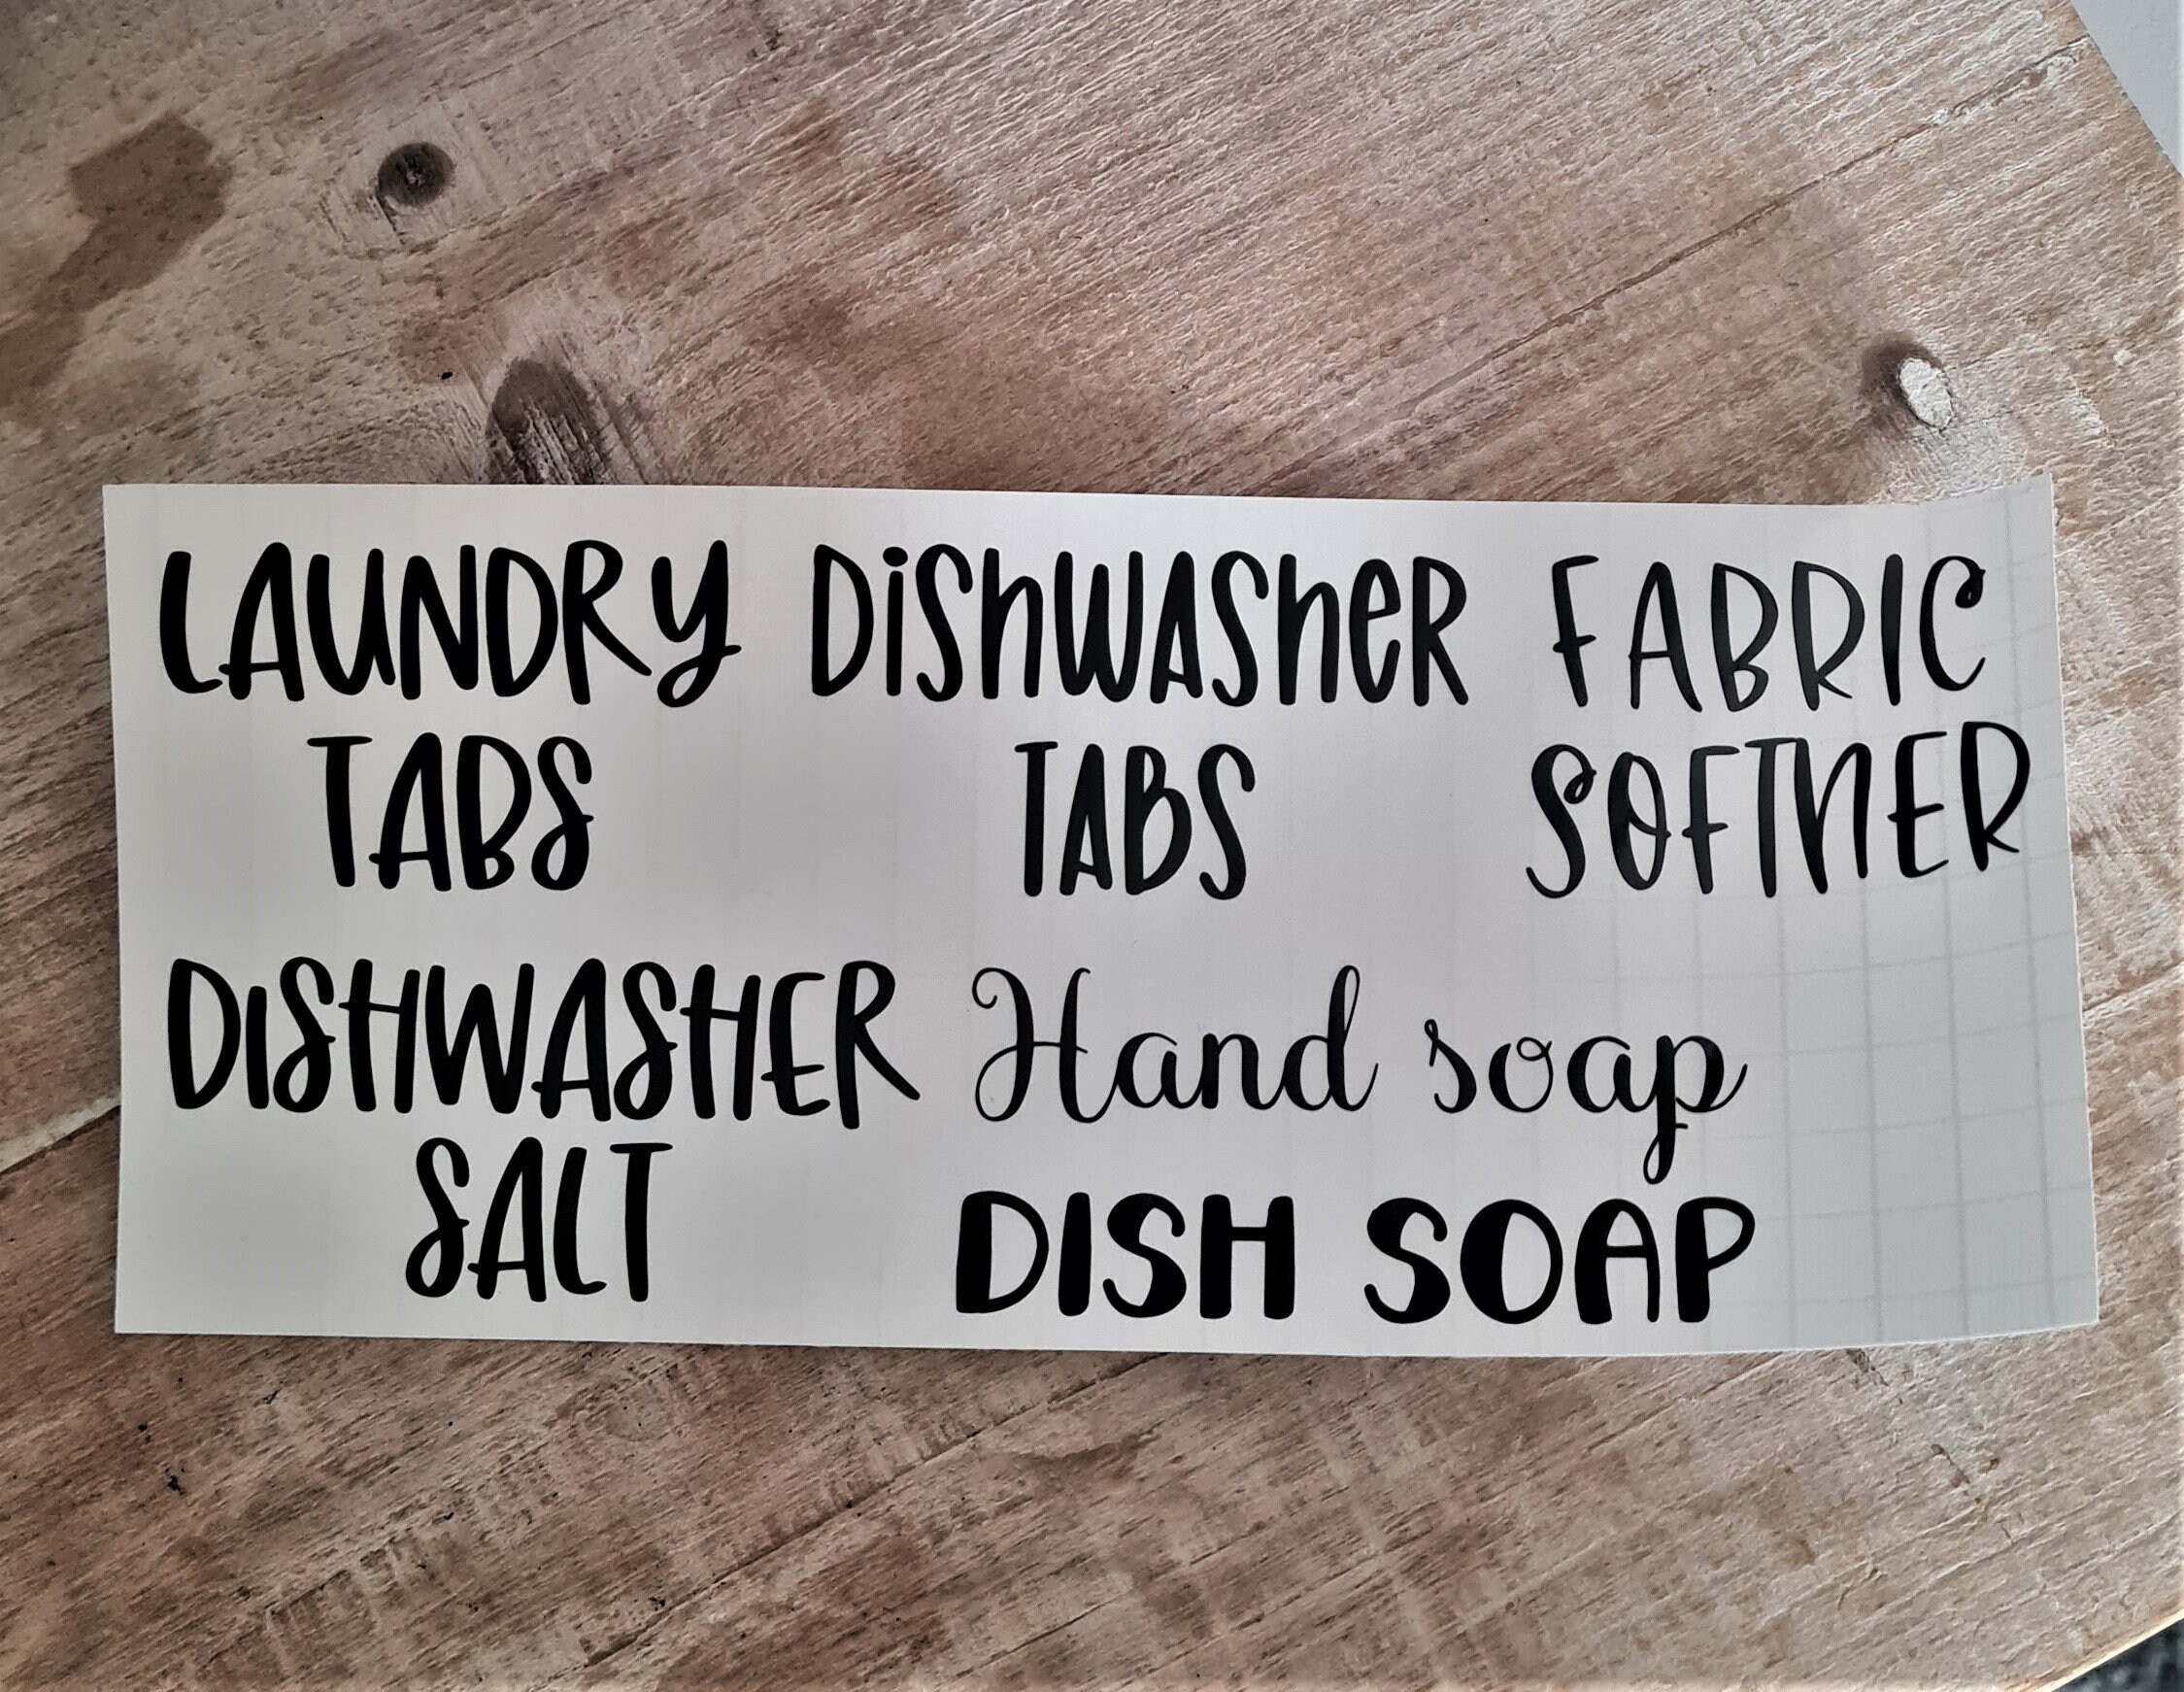 Laundry Room Labels Utility Decals Washing Powder Fabric 